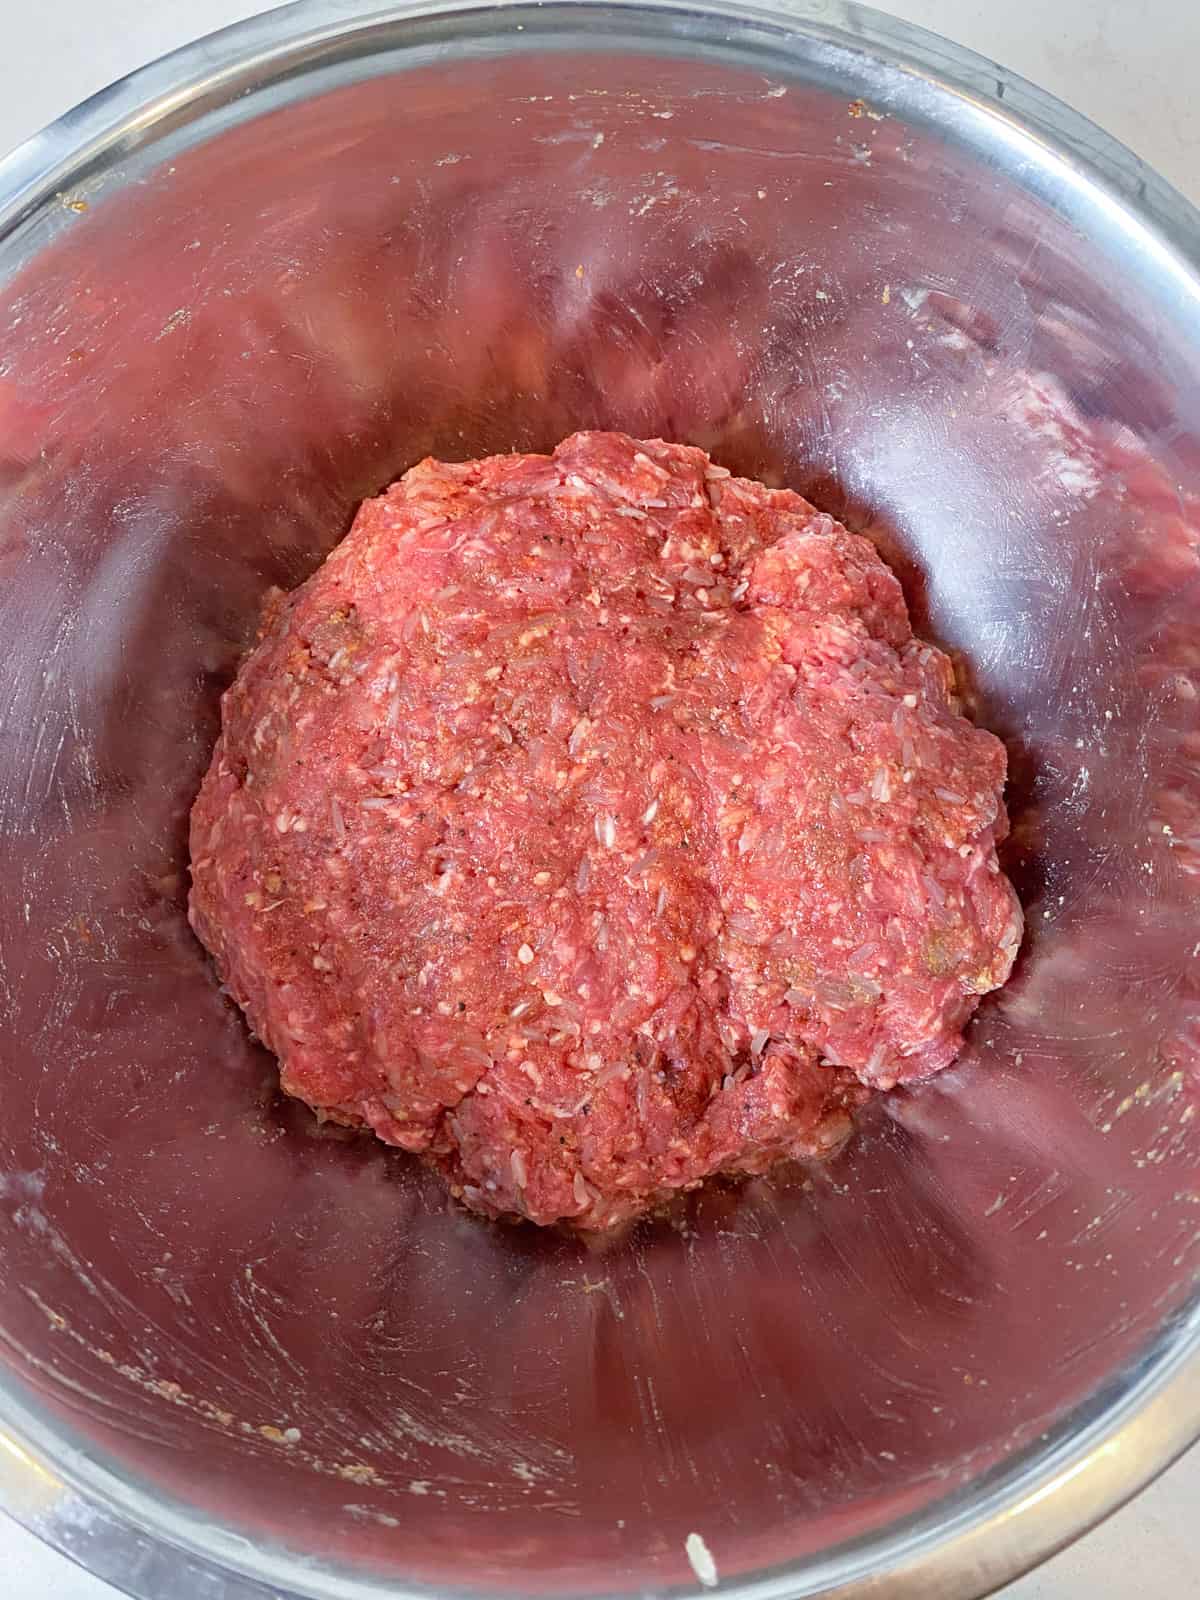 Mix the ground beef mixture until well combined.